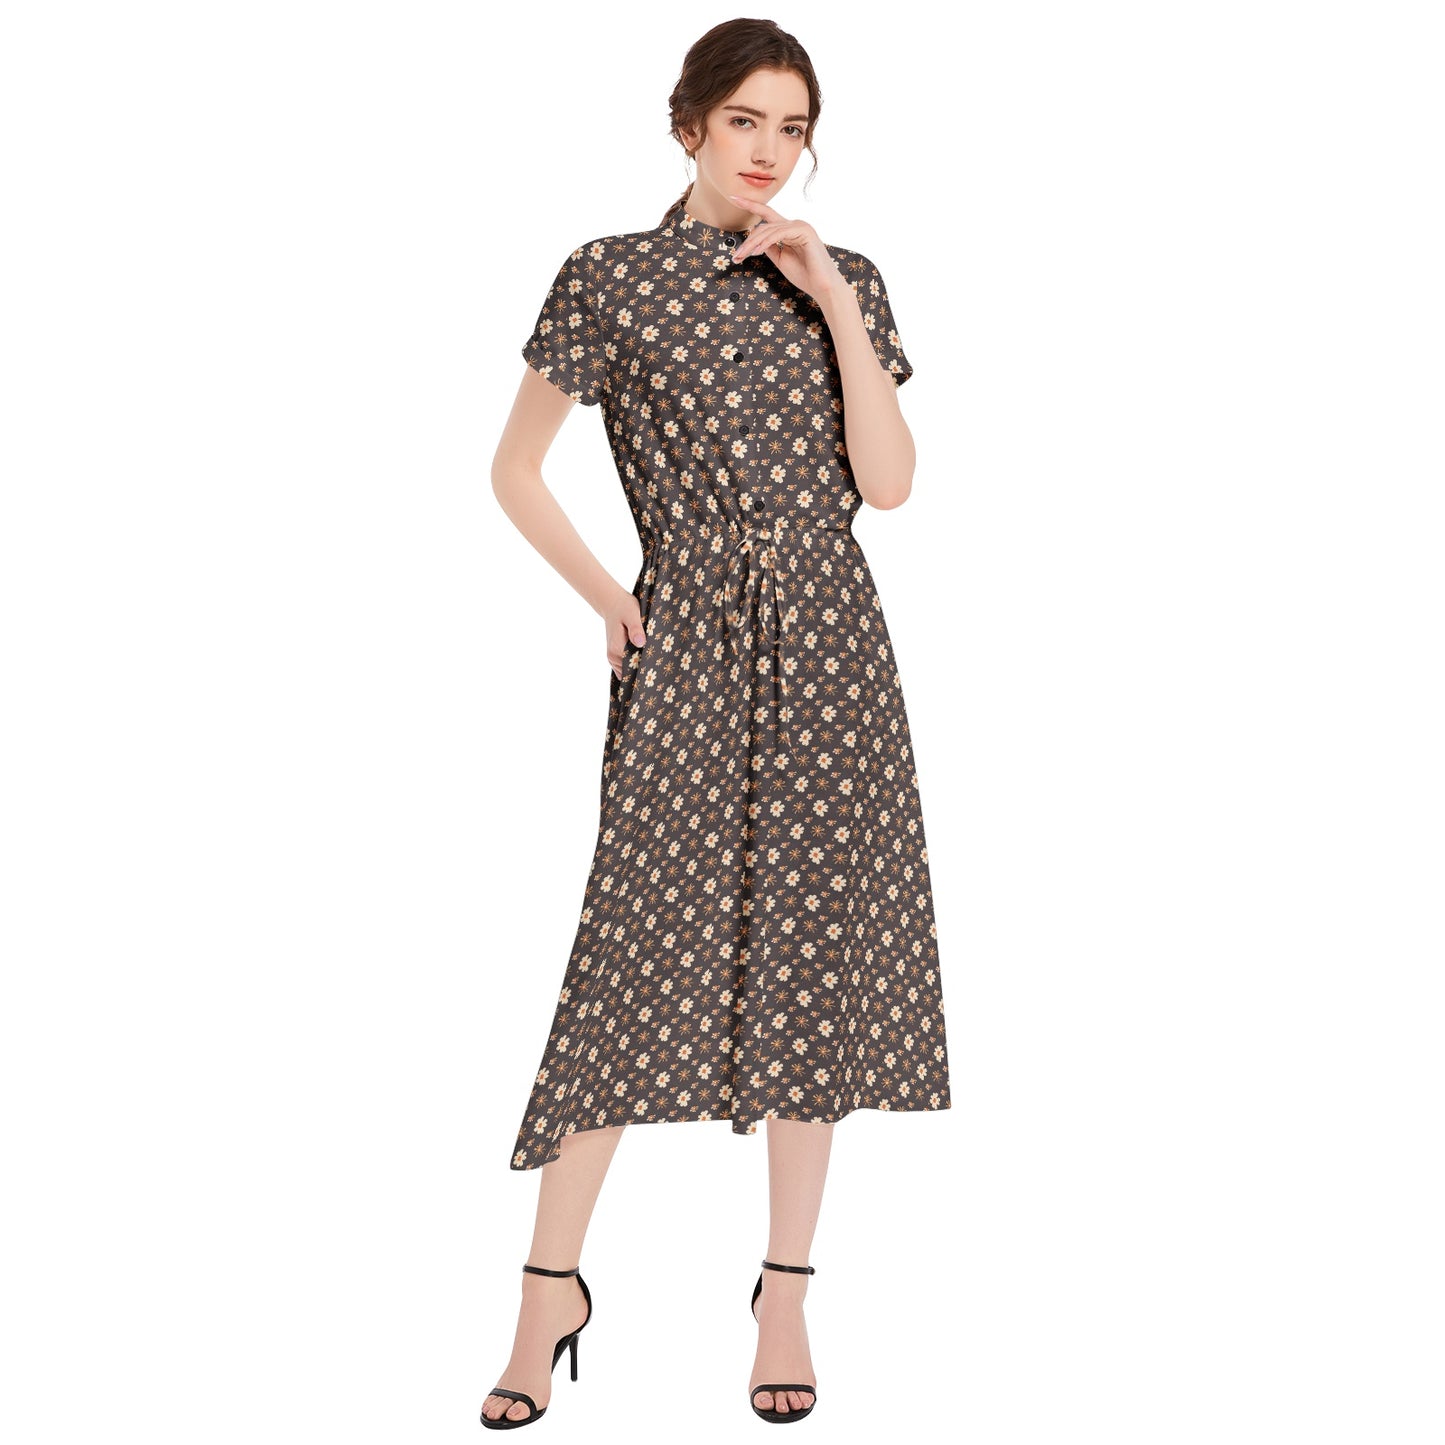 Vampire Art Retro French-style A-line Drawstring Flared Casual Midi Dress - Seventies Floral Brown